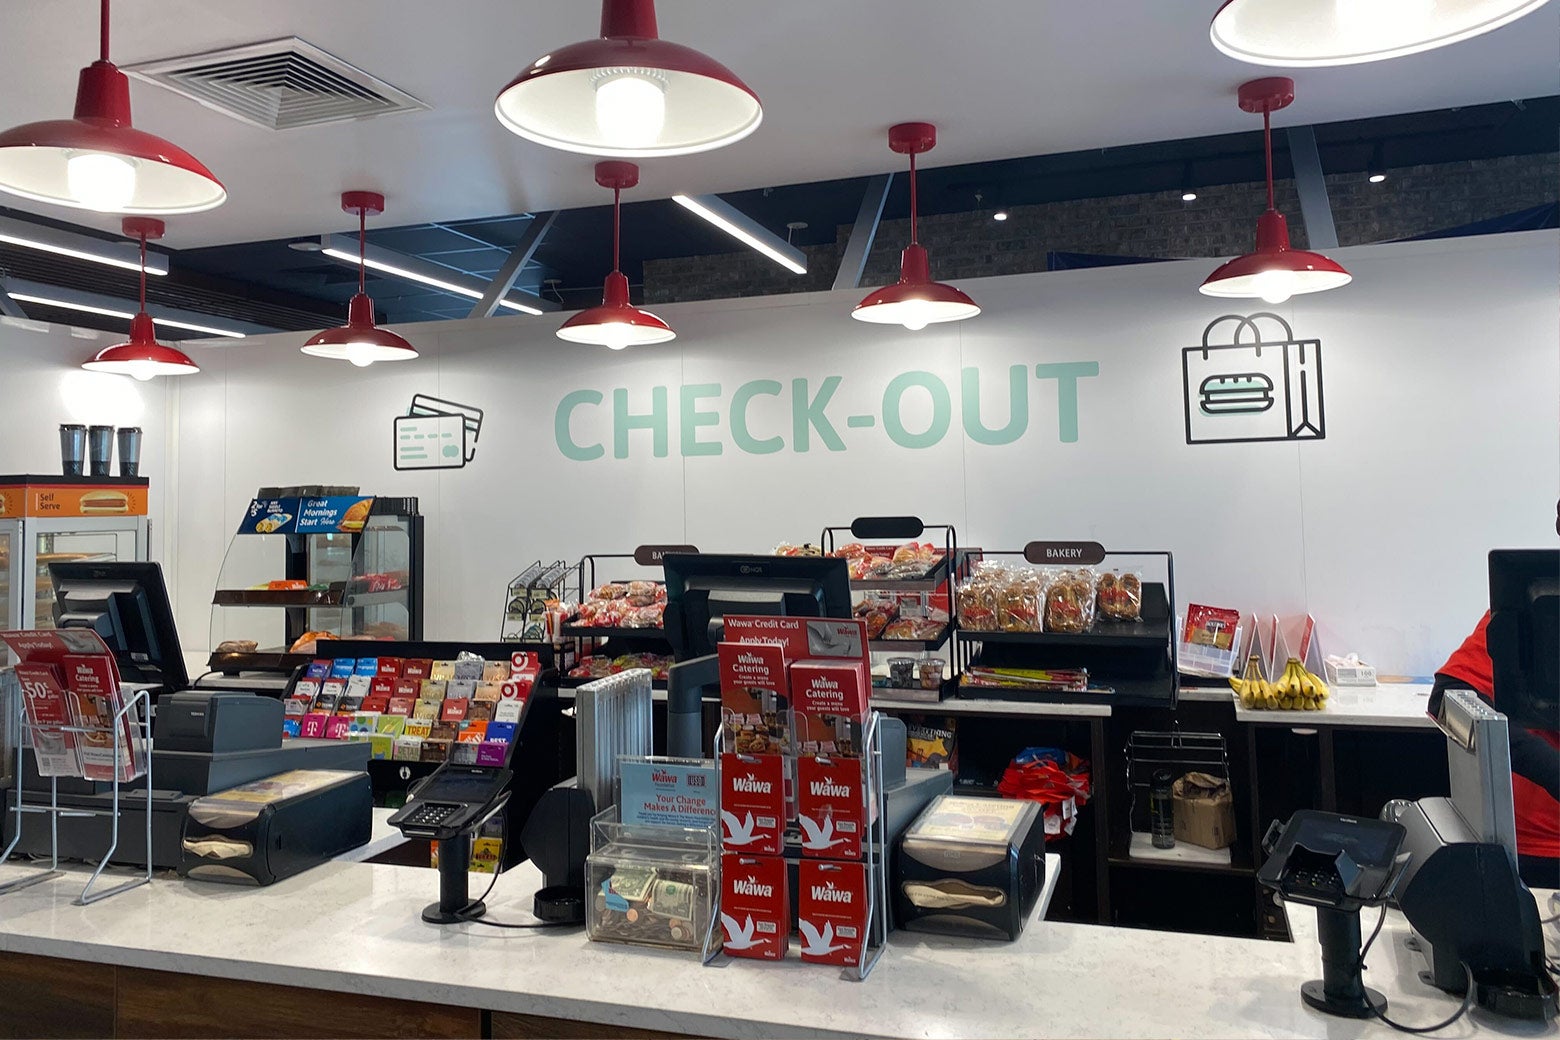 Wawa interior: check-out area with cash registers.